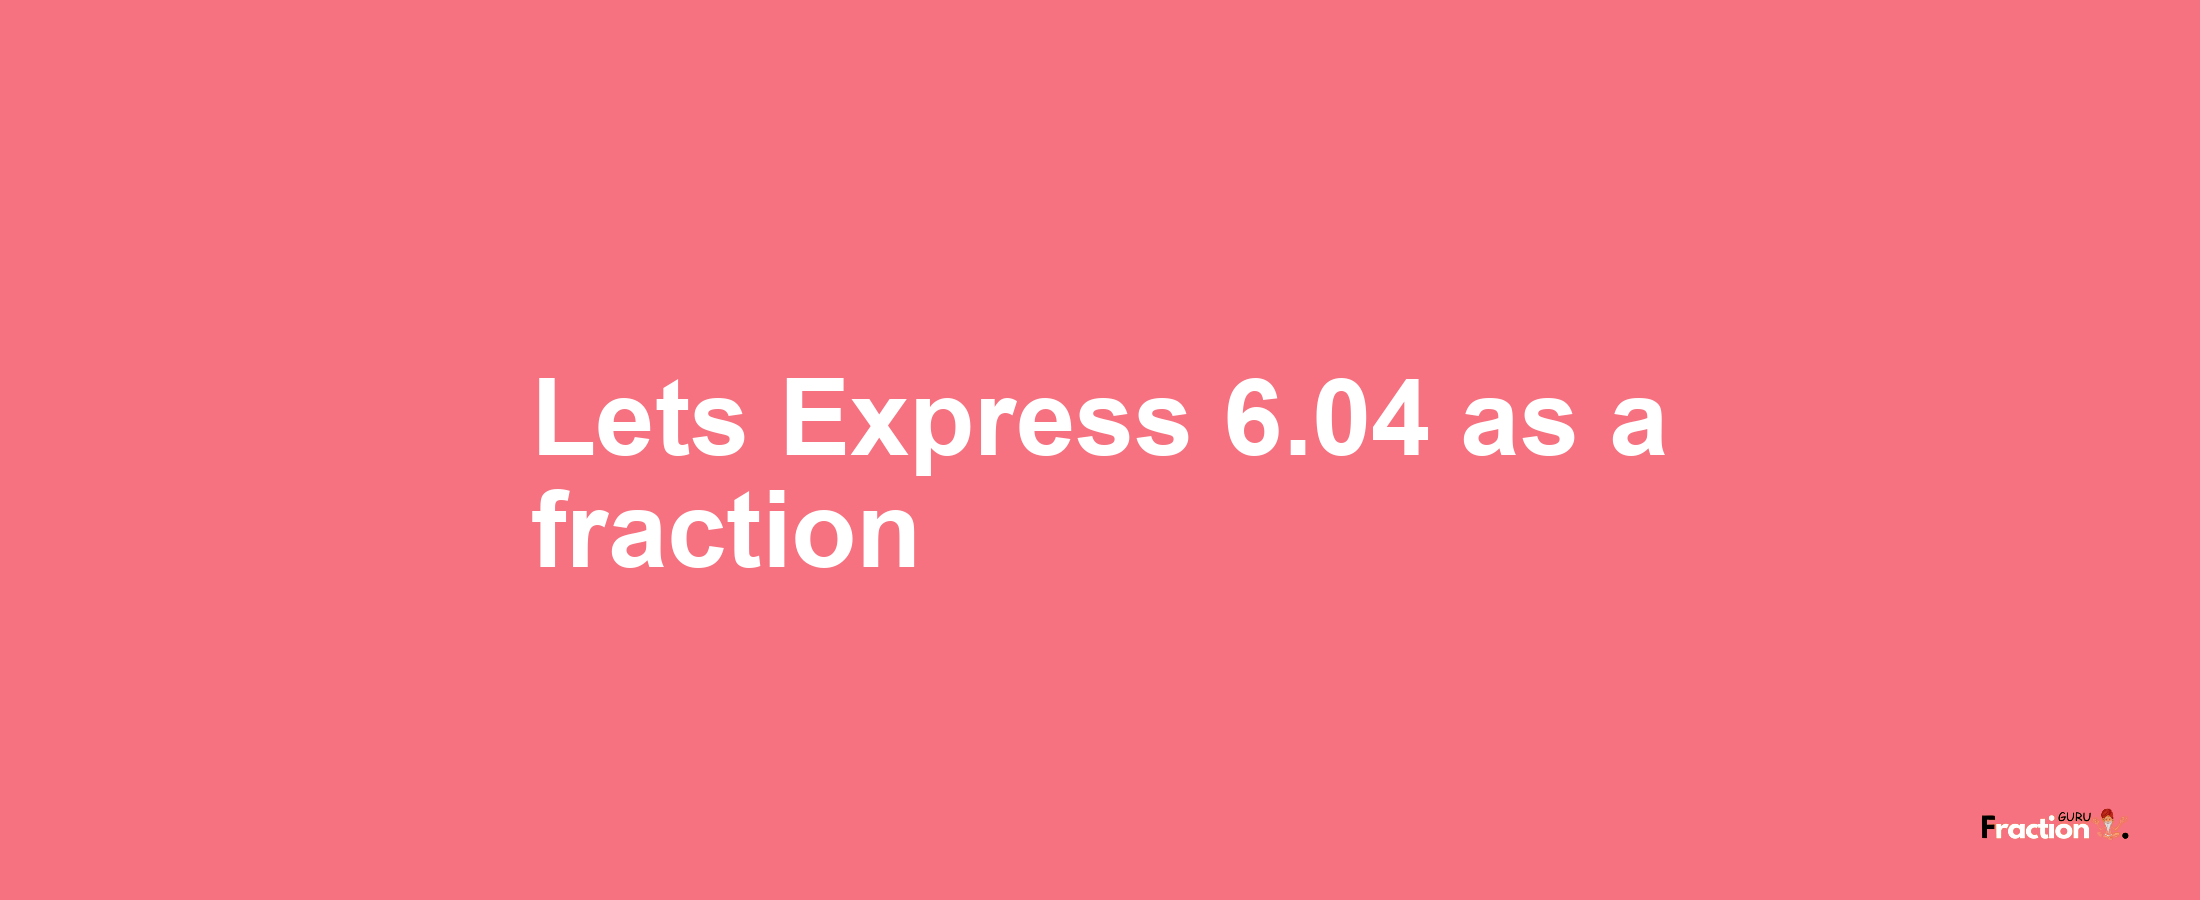 Lets Express 6.04 as afraction